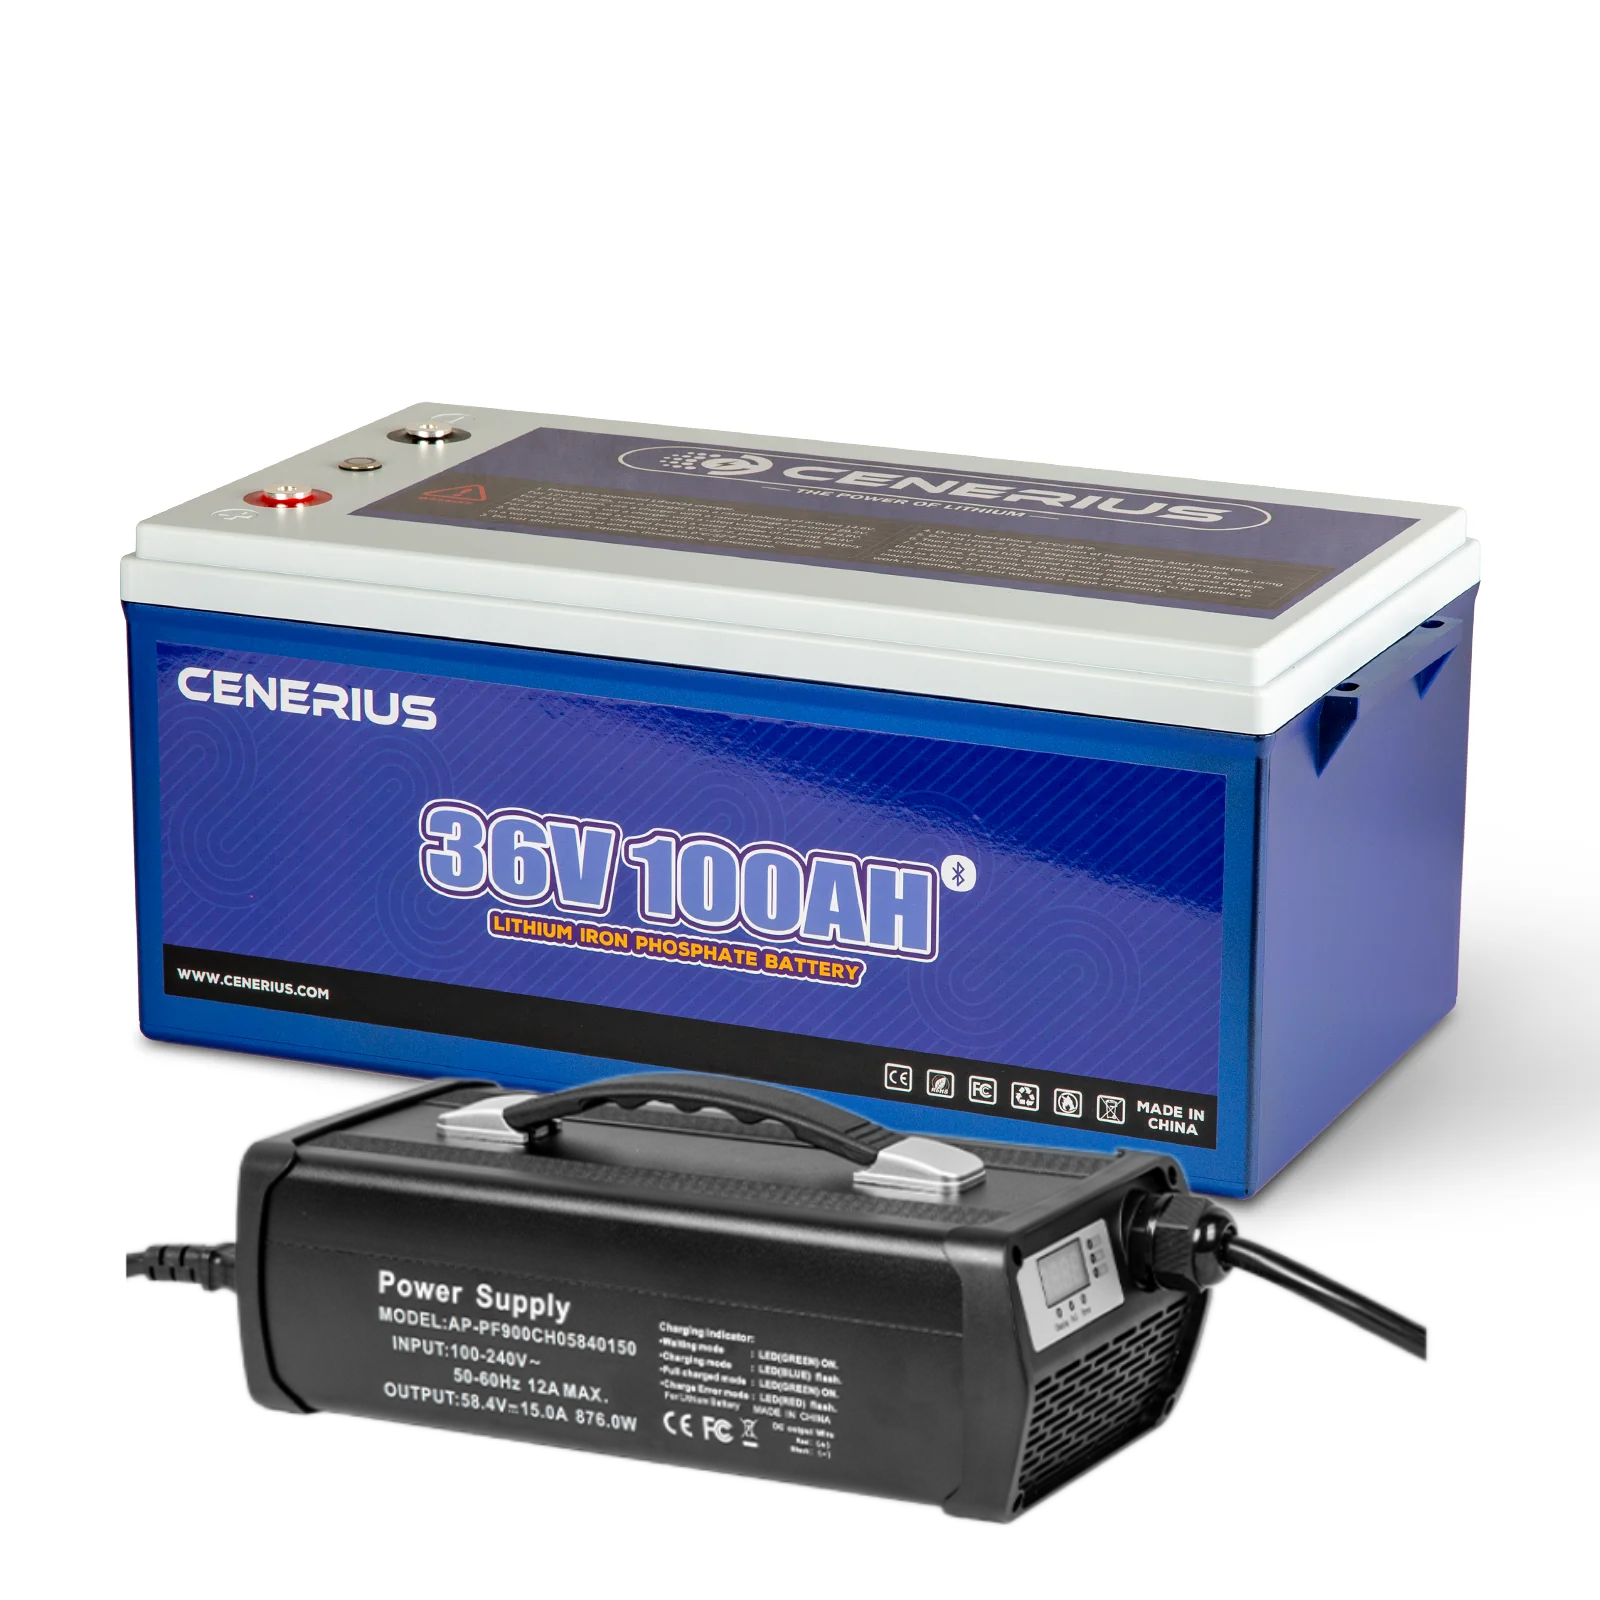 Cenerius 36V 100Ah LiFePO4 Lithium Battery with Bluetooth, Built In 100A  BMS,3840Wh Energy,Peak Current 500A,High & Low Temp Protection Deep Cycle  Rechargeable,only about 1/3 of the volume and mass of lead-acid batteries